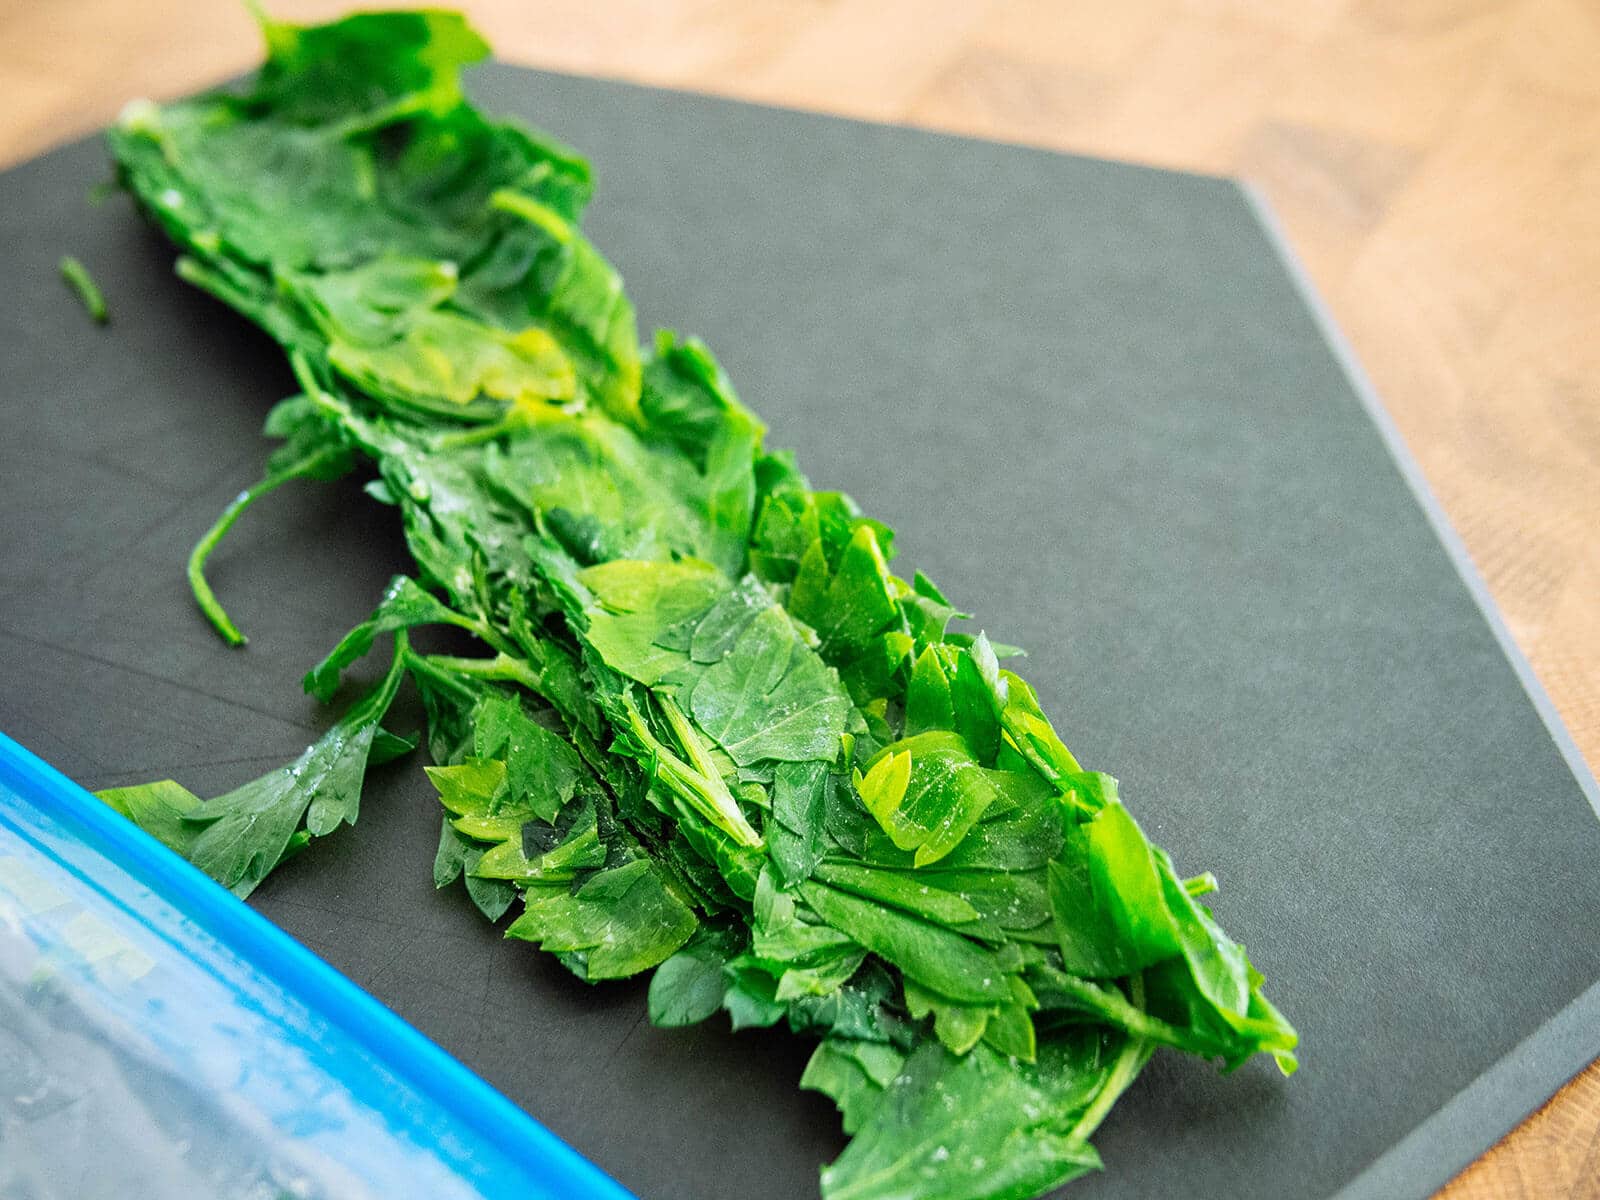 Frozen portion of parsley pulled out onto a cutting board